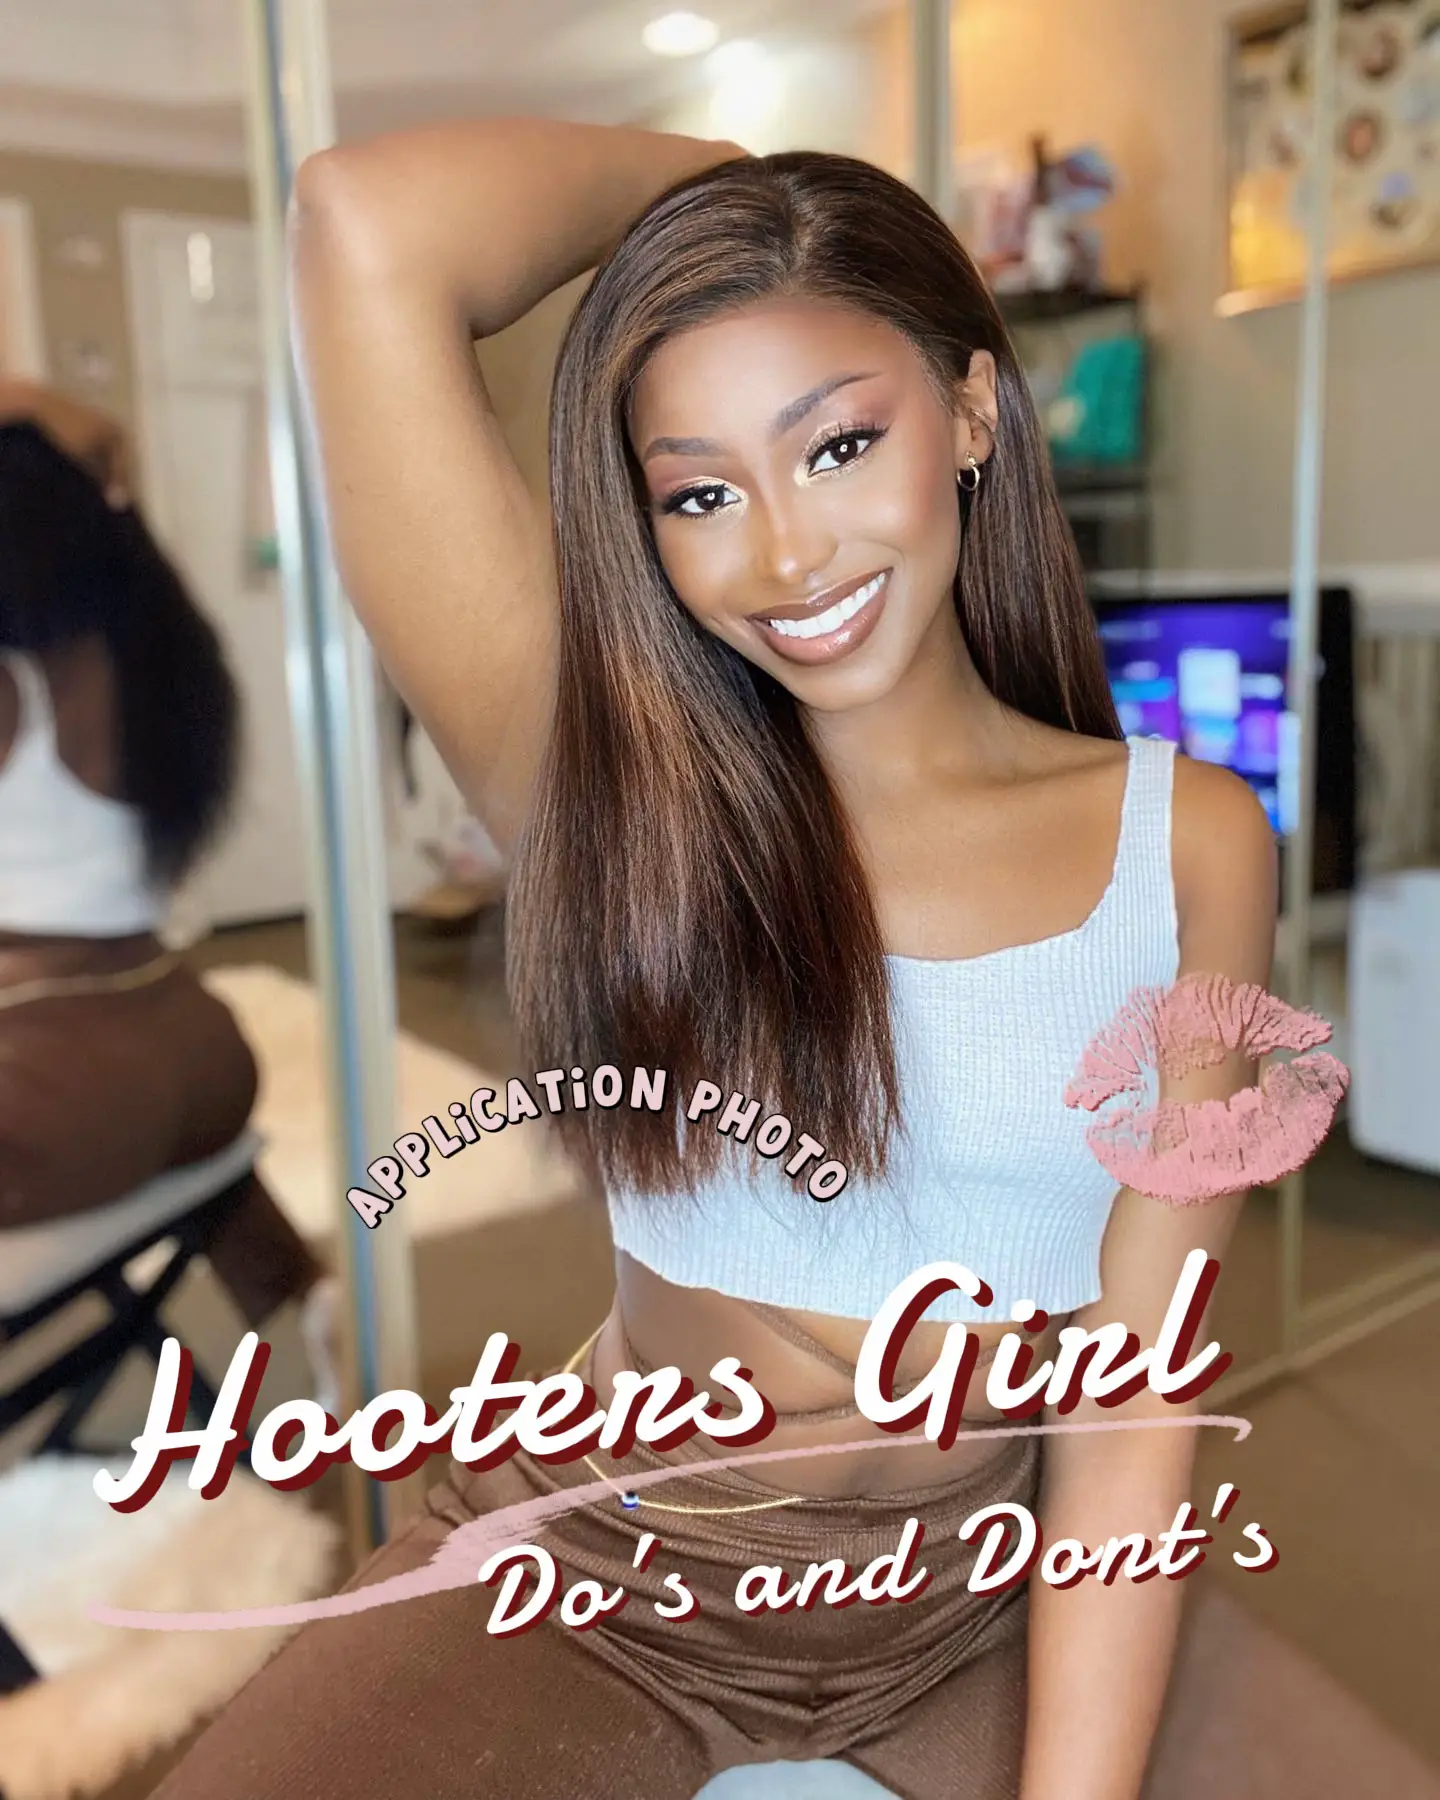 I'm a Hooters girl - I tried the viral new underwear trend, people